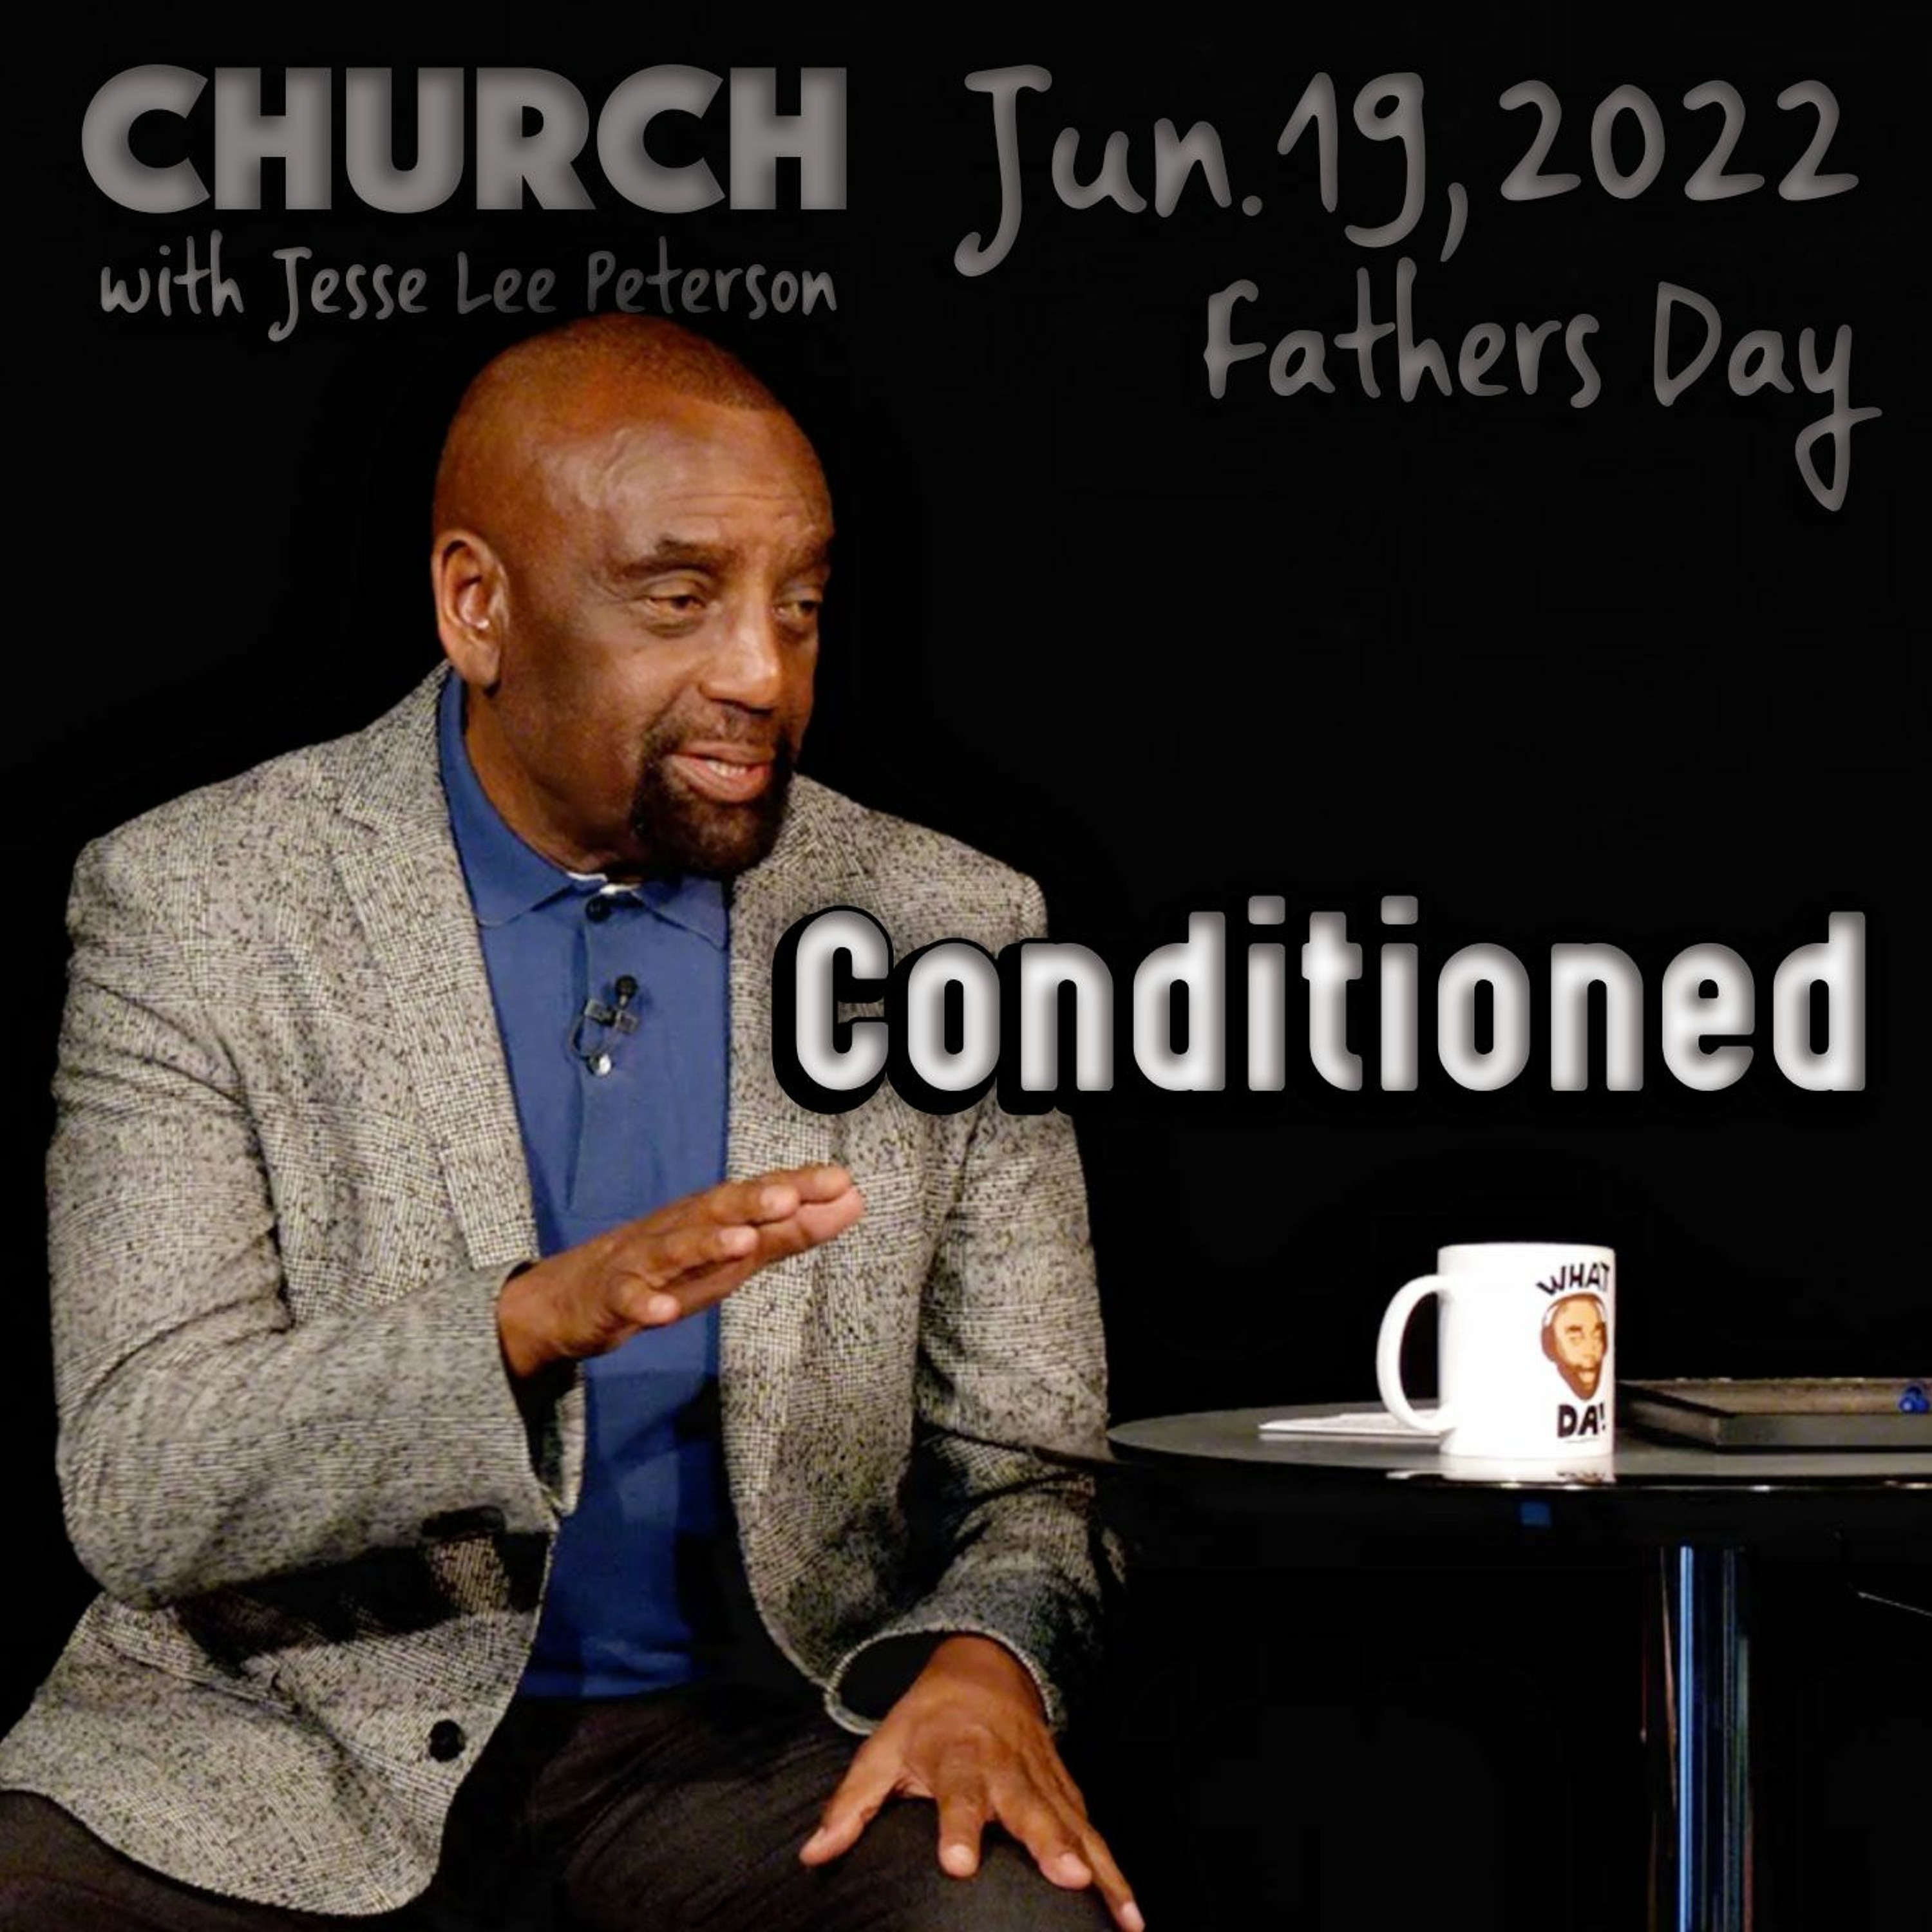 Are You in a Wrong Human Relationship? (Father's Day Church, 6/19/22)